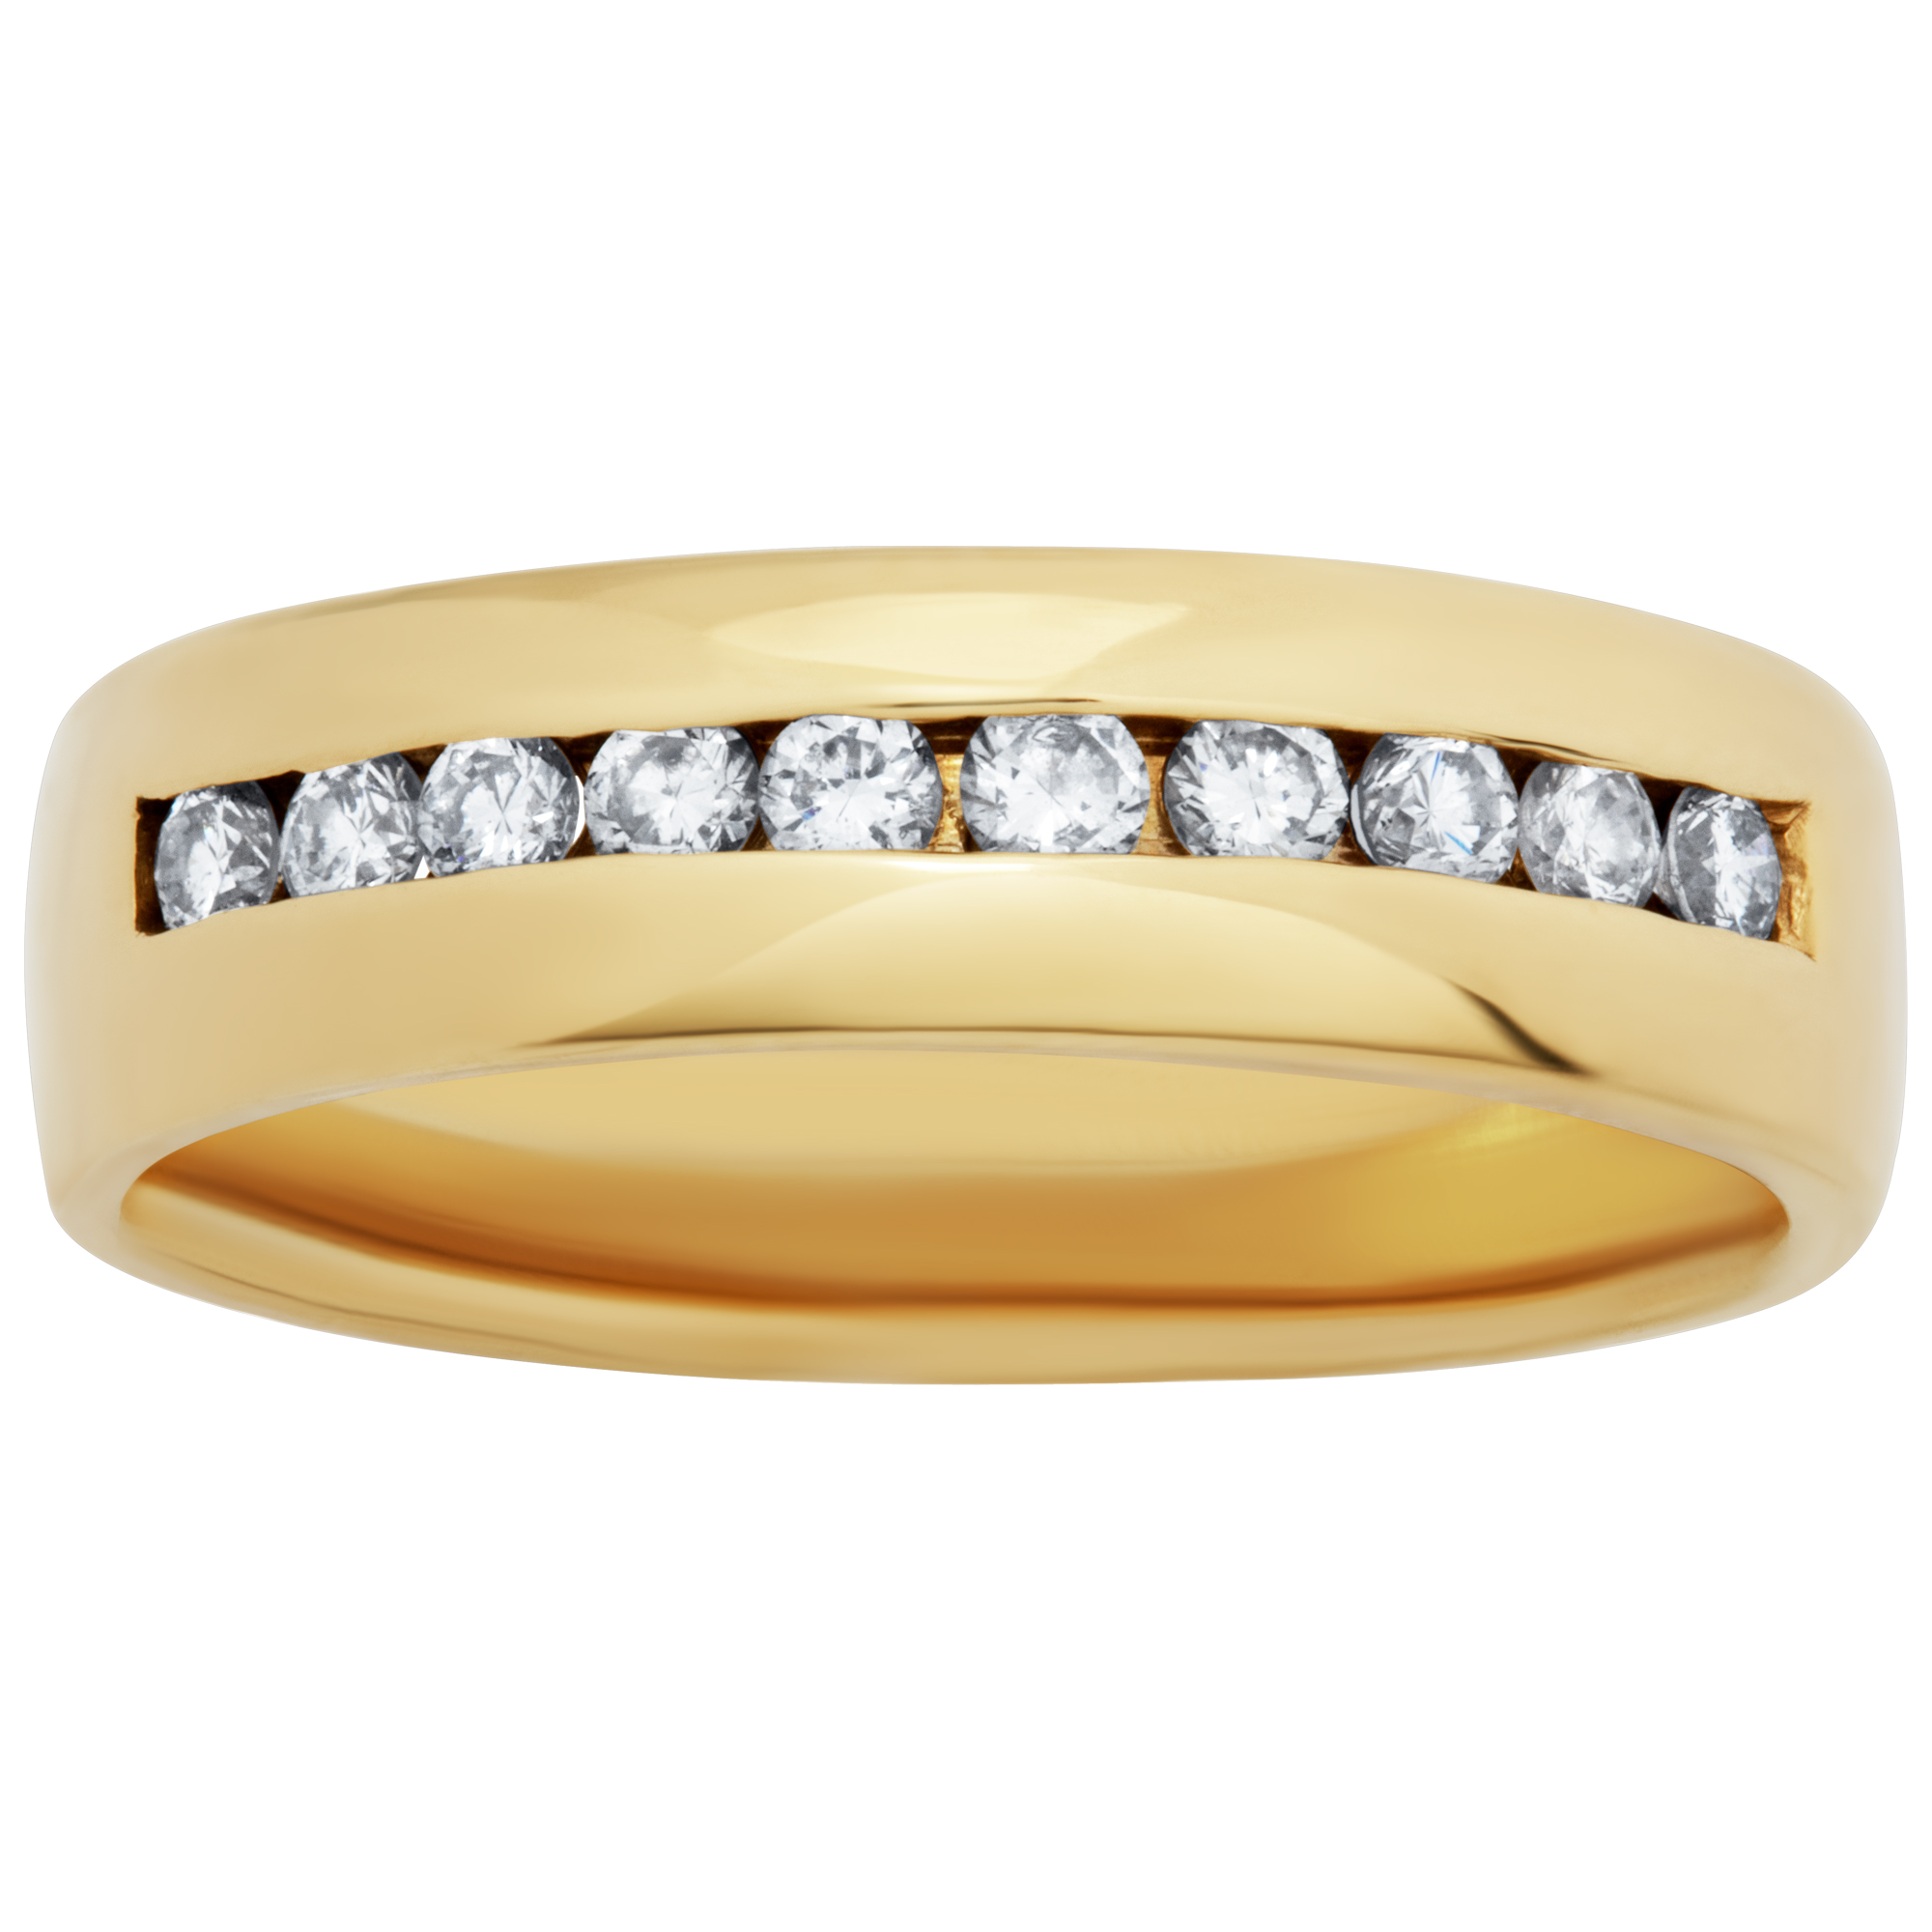 Semi Diamond Eternity Band and Ring in 14k yellow gold. 0.50 carats in channel set diamonds. Size 10.5